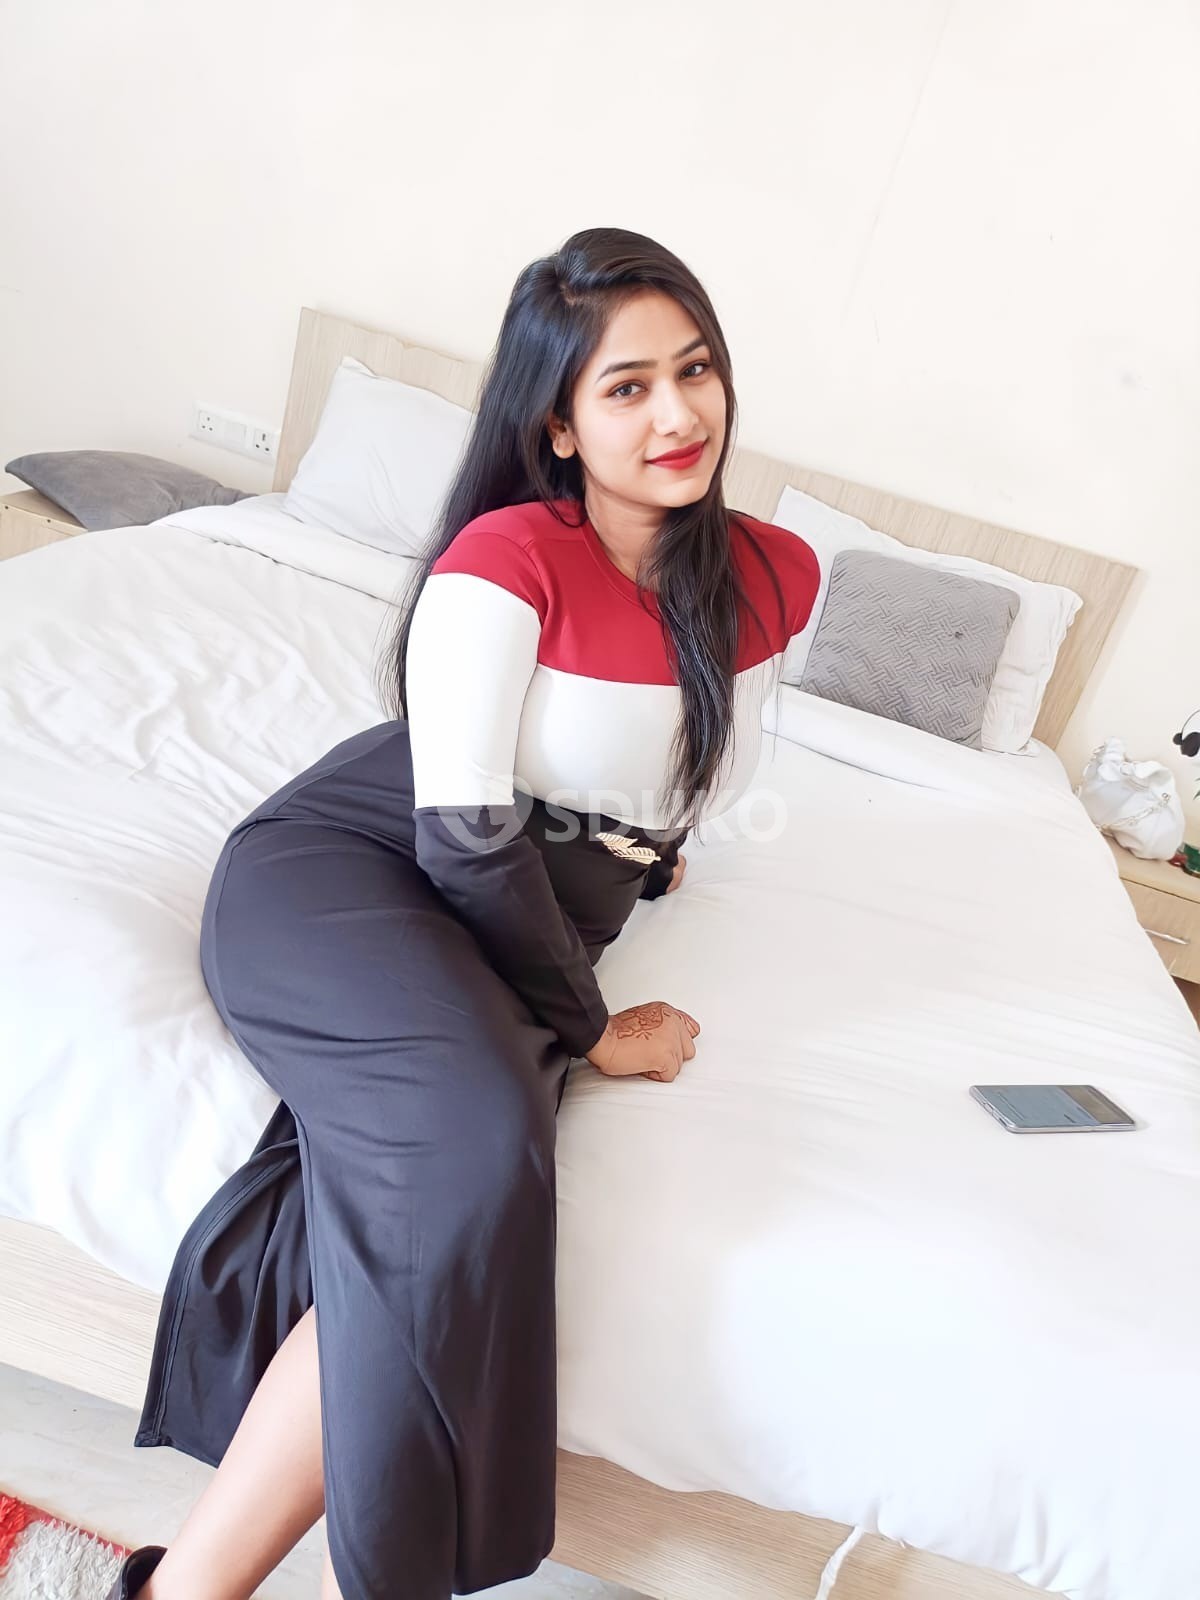 Malad best call girl available room service and hotel service